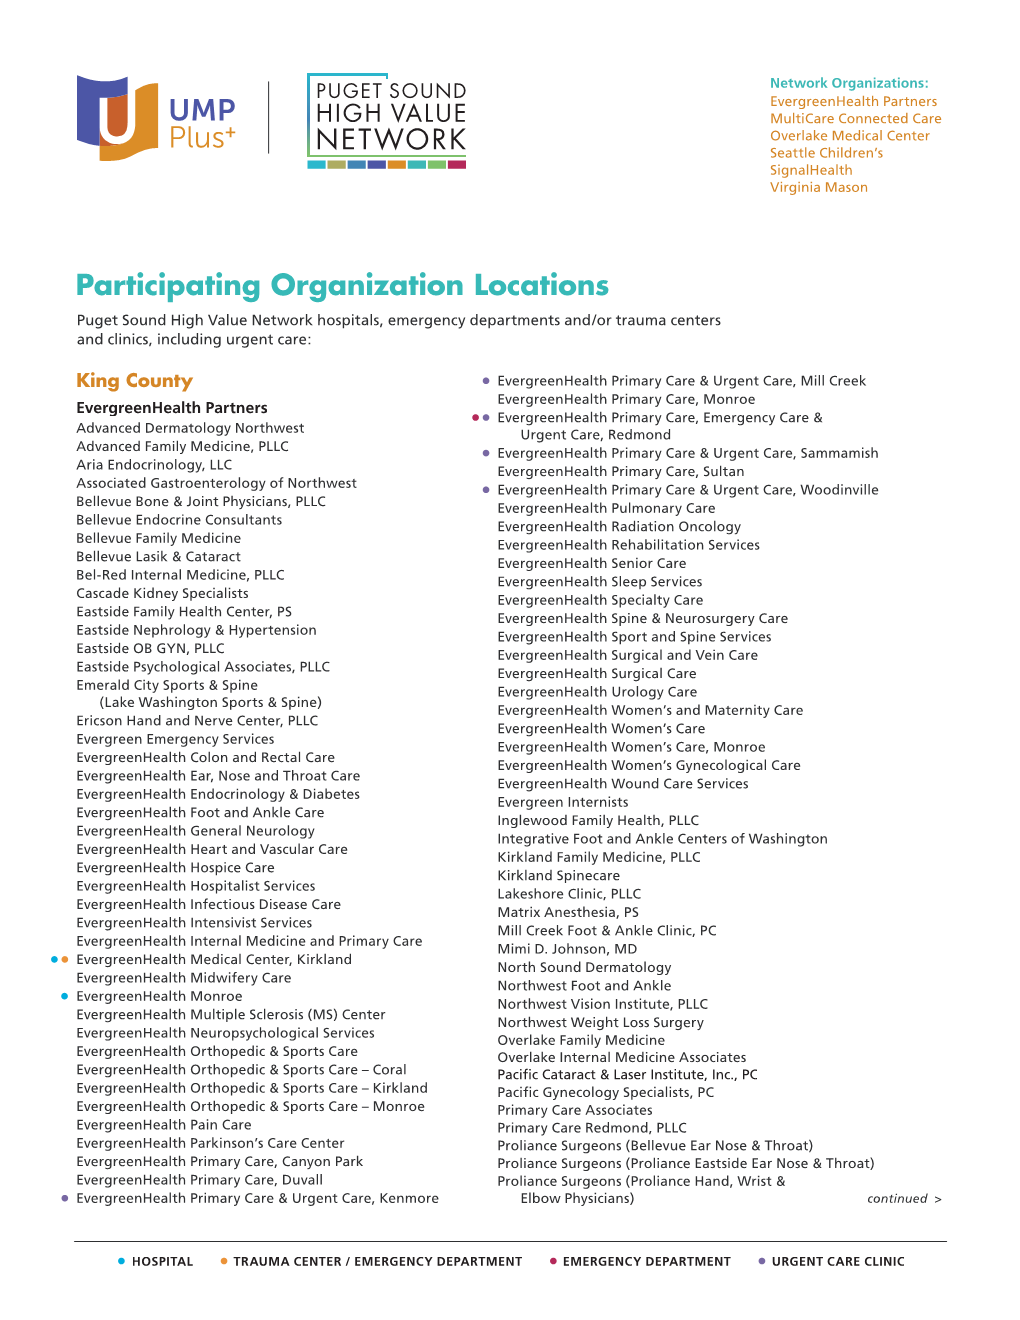 Participating Organization Locations Puget Sound High Value Network Hospitals, Emergency Departments And/Or Trauma Centers and Clinics, Including Urgent Care